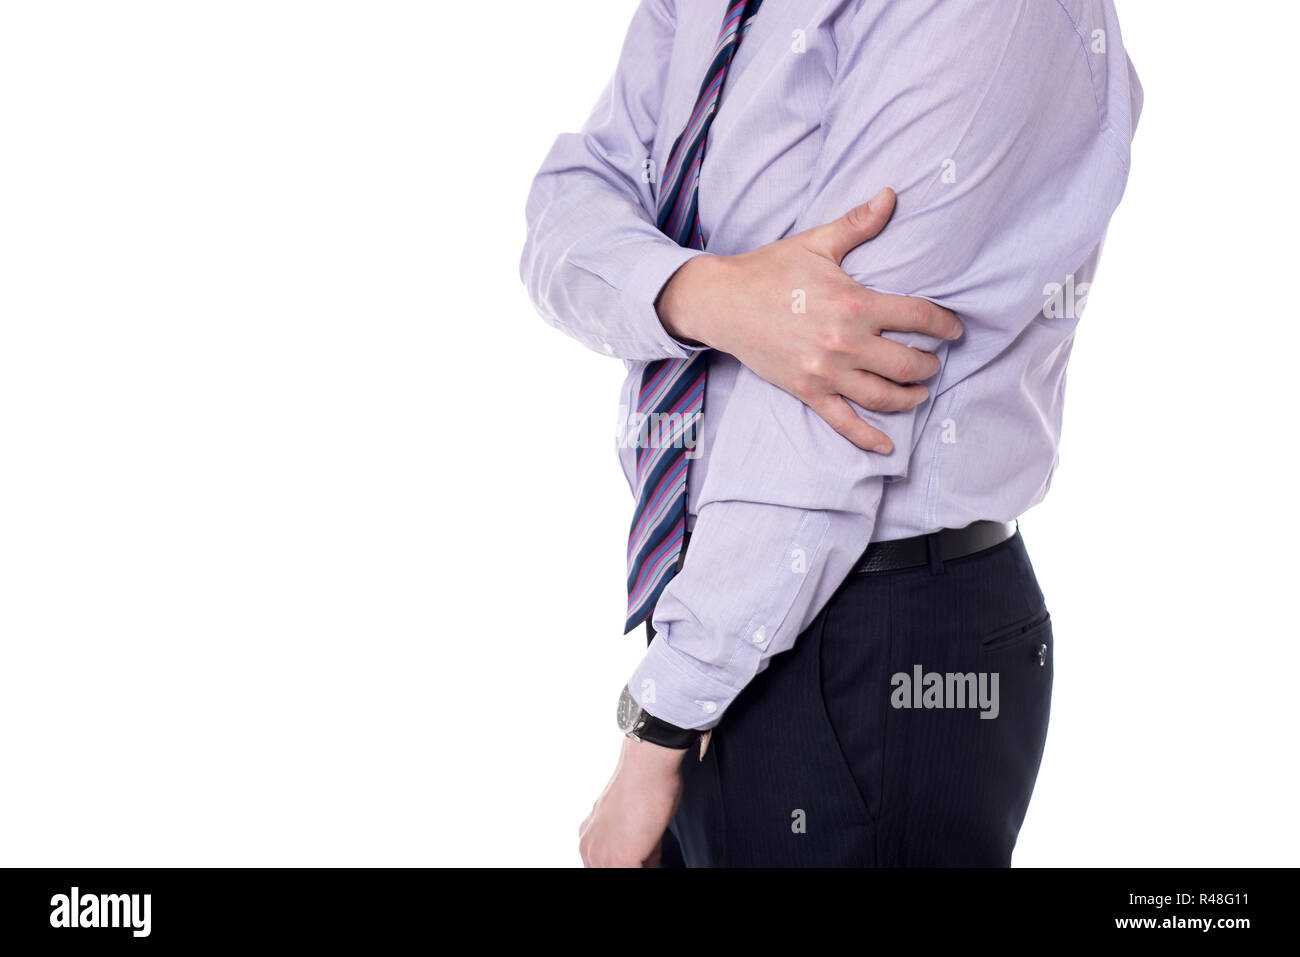 Cropped image of businessman with elbow pain Stock Photo